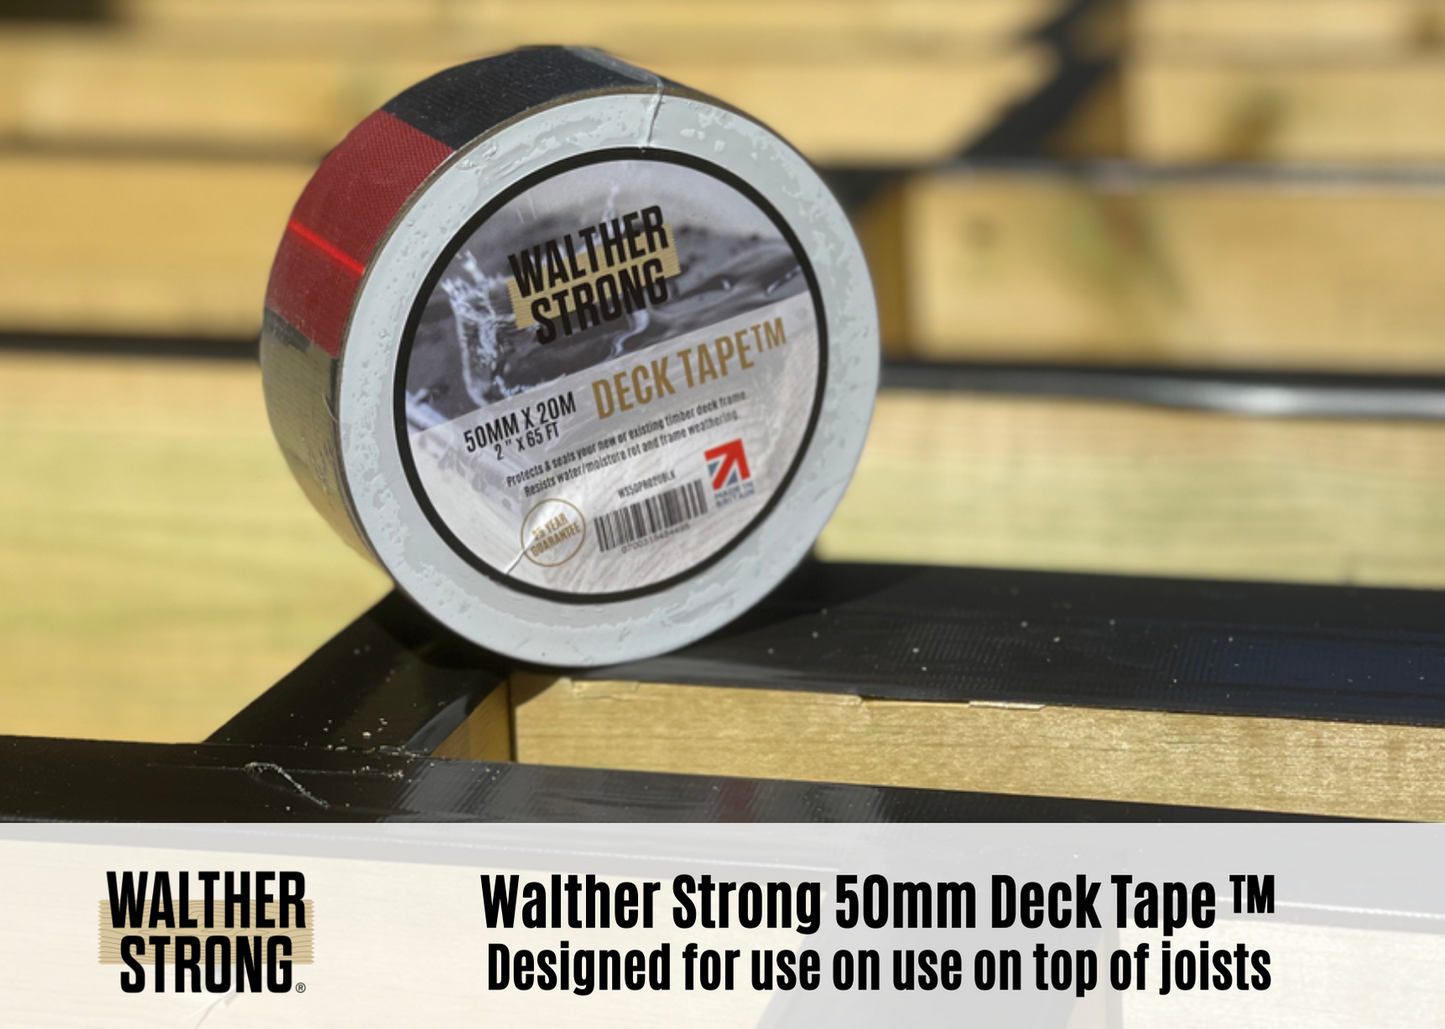 DECK TAPE® [Recommended for use on top of joists]